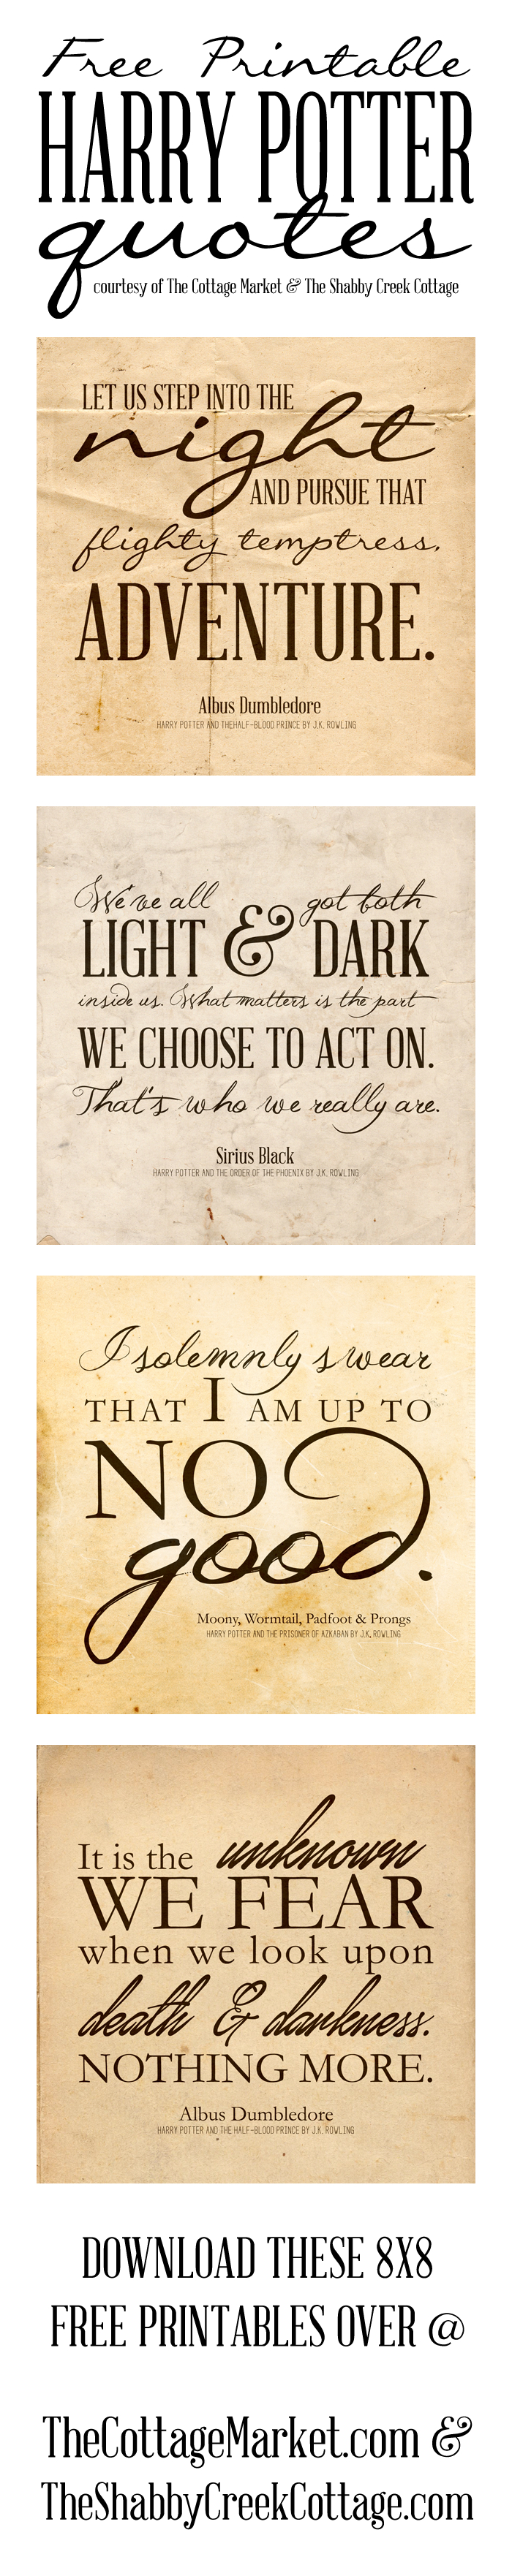 Free Printable Harry Potter Quotes | The Cottage Market - Free Printable Harry Potter Pictures